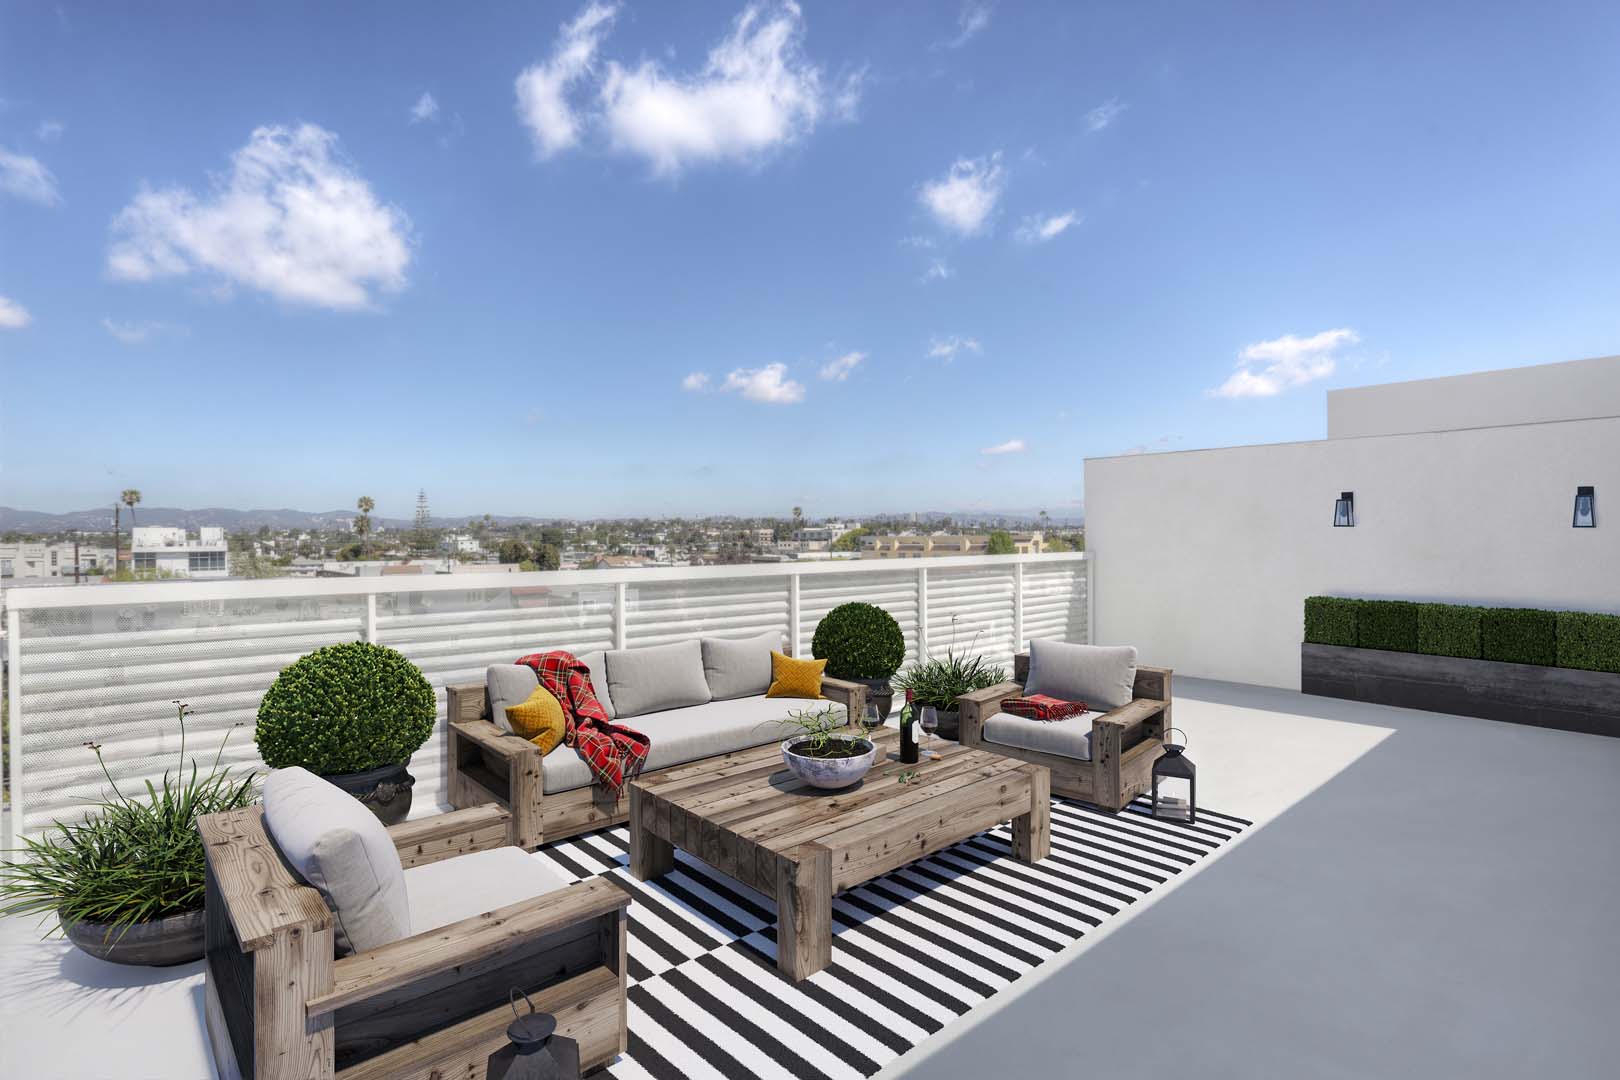 Apartments for Rent in Culver City - The Lucky - Rooftop Sitting Area with Comfy Chairs and Wooden Table